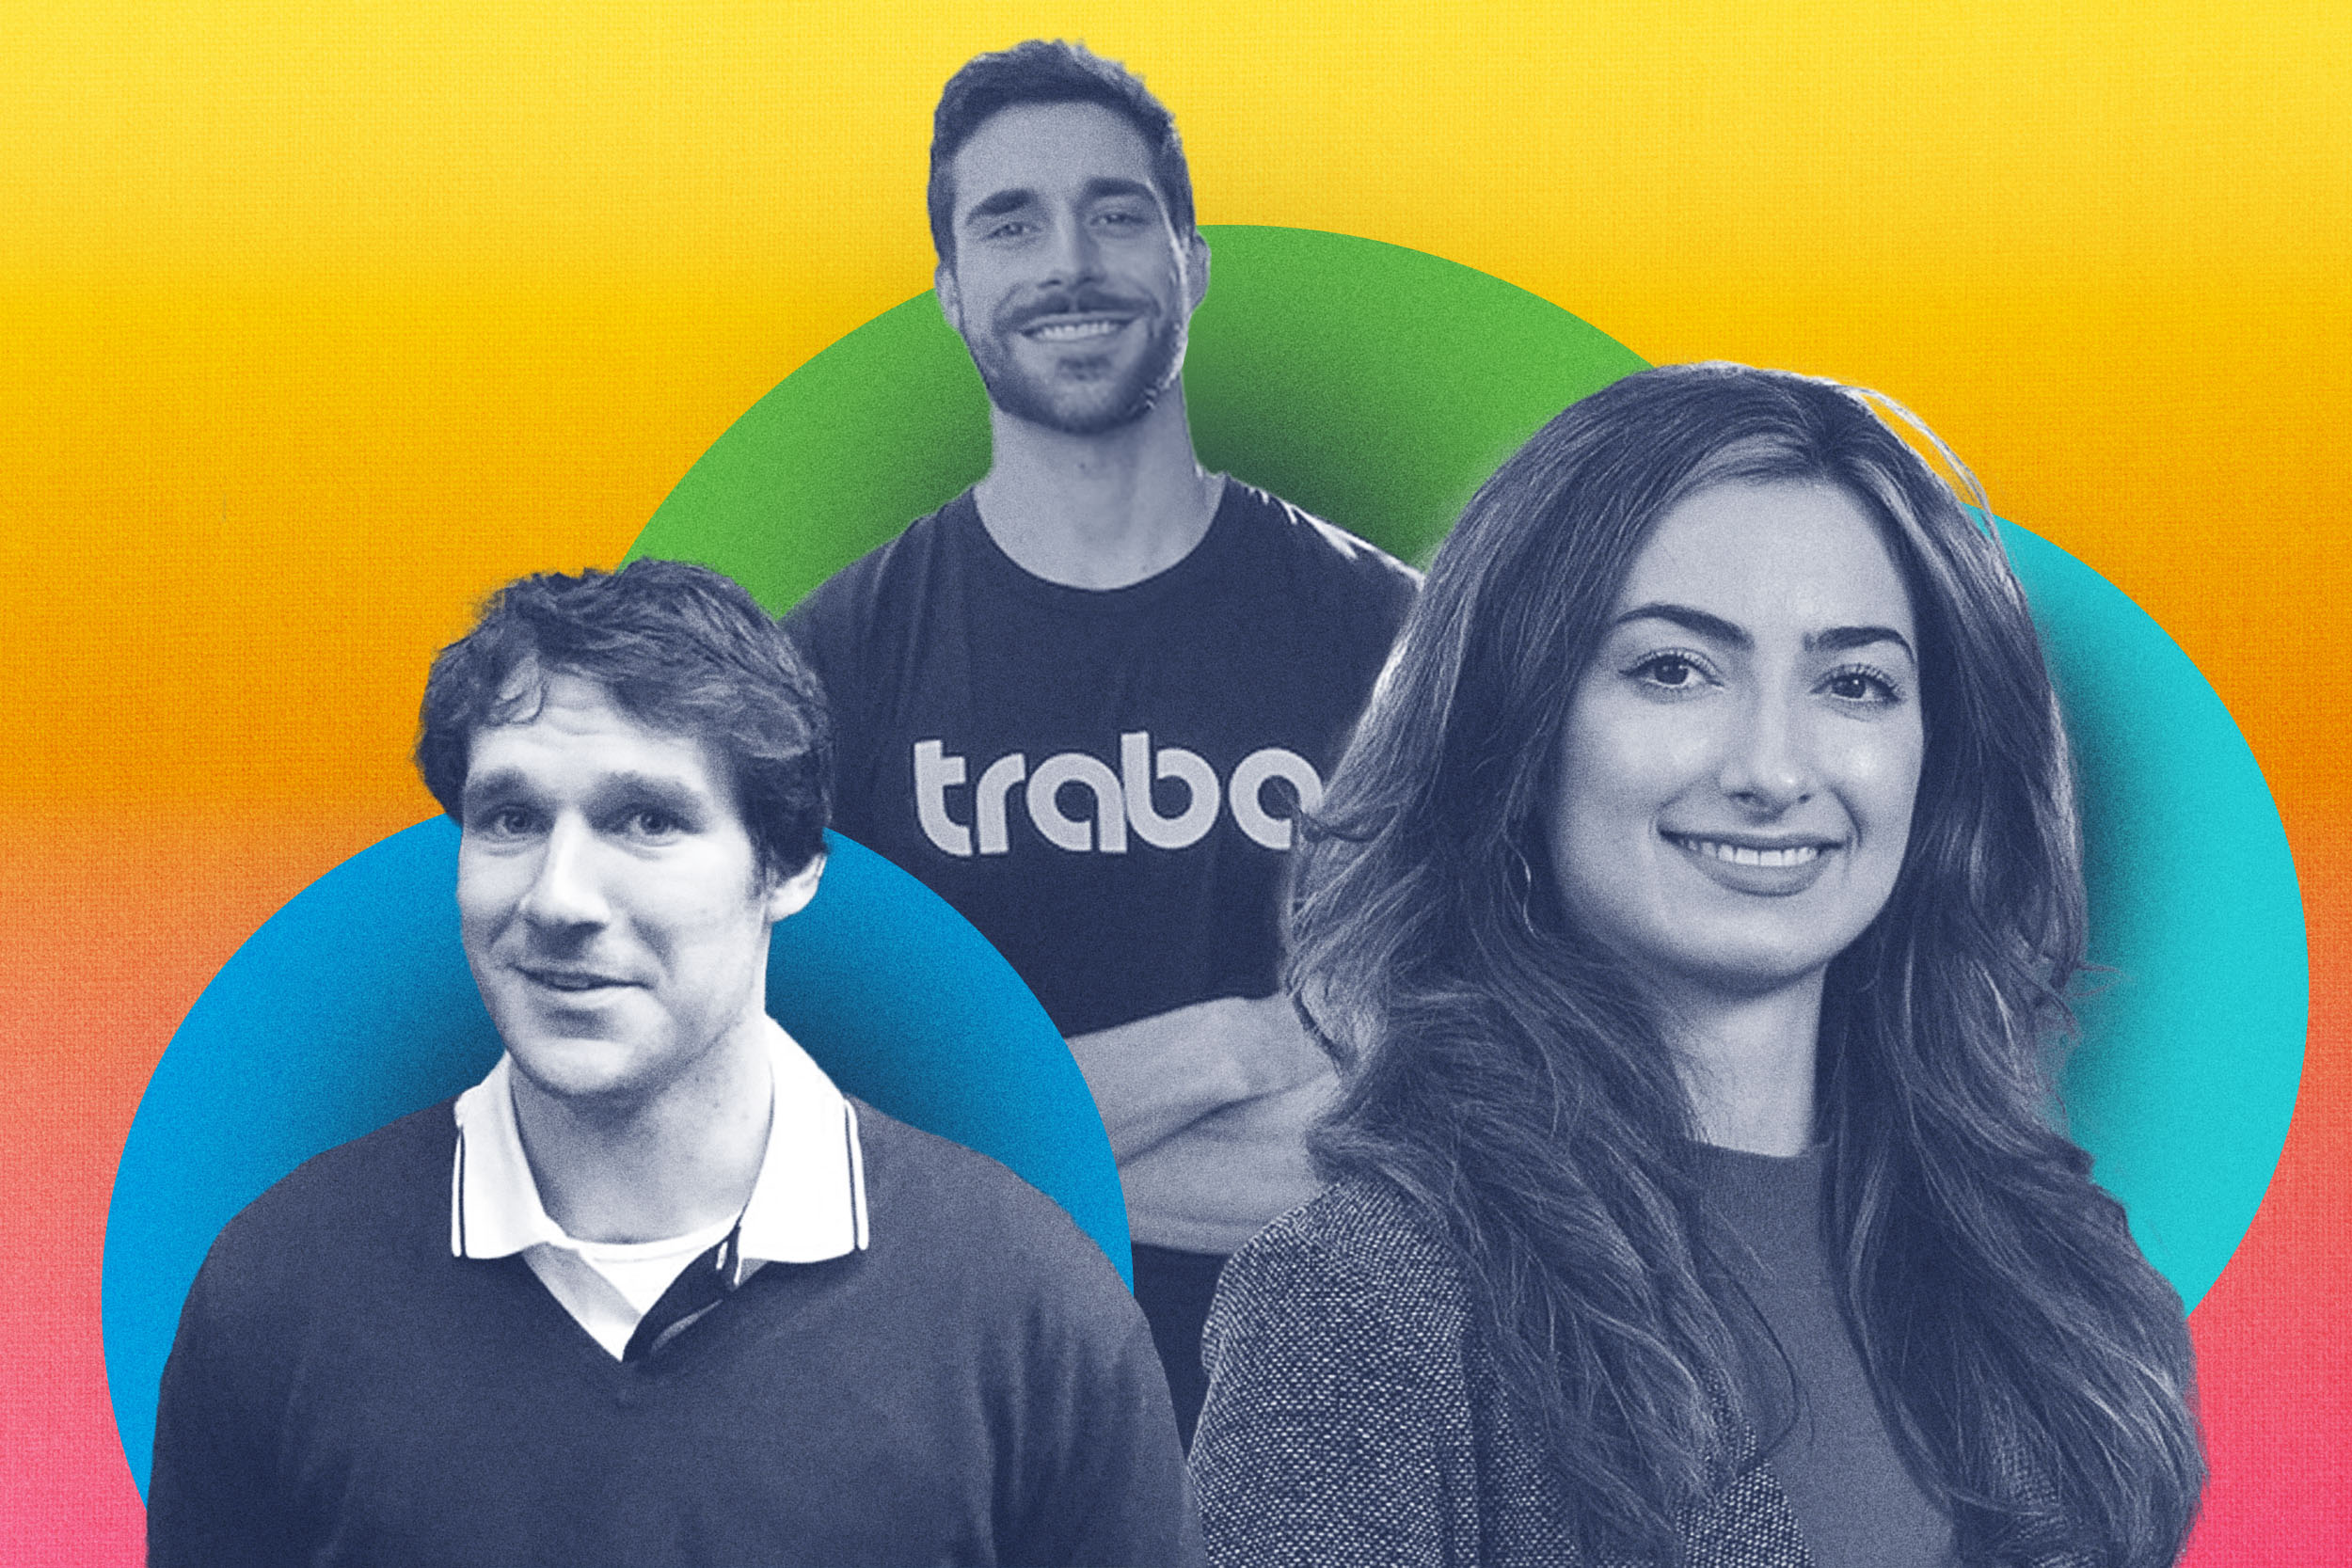 Meet the Trio of UVA Alumni on the 2022 Forbes '30 Under 30' Lists